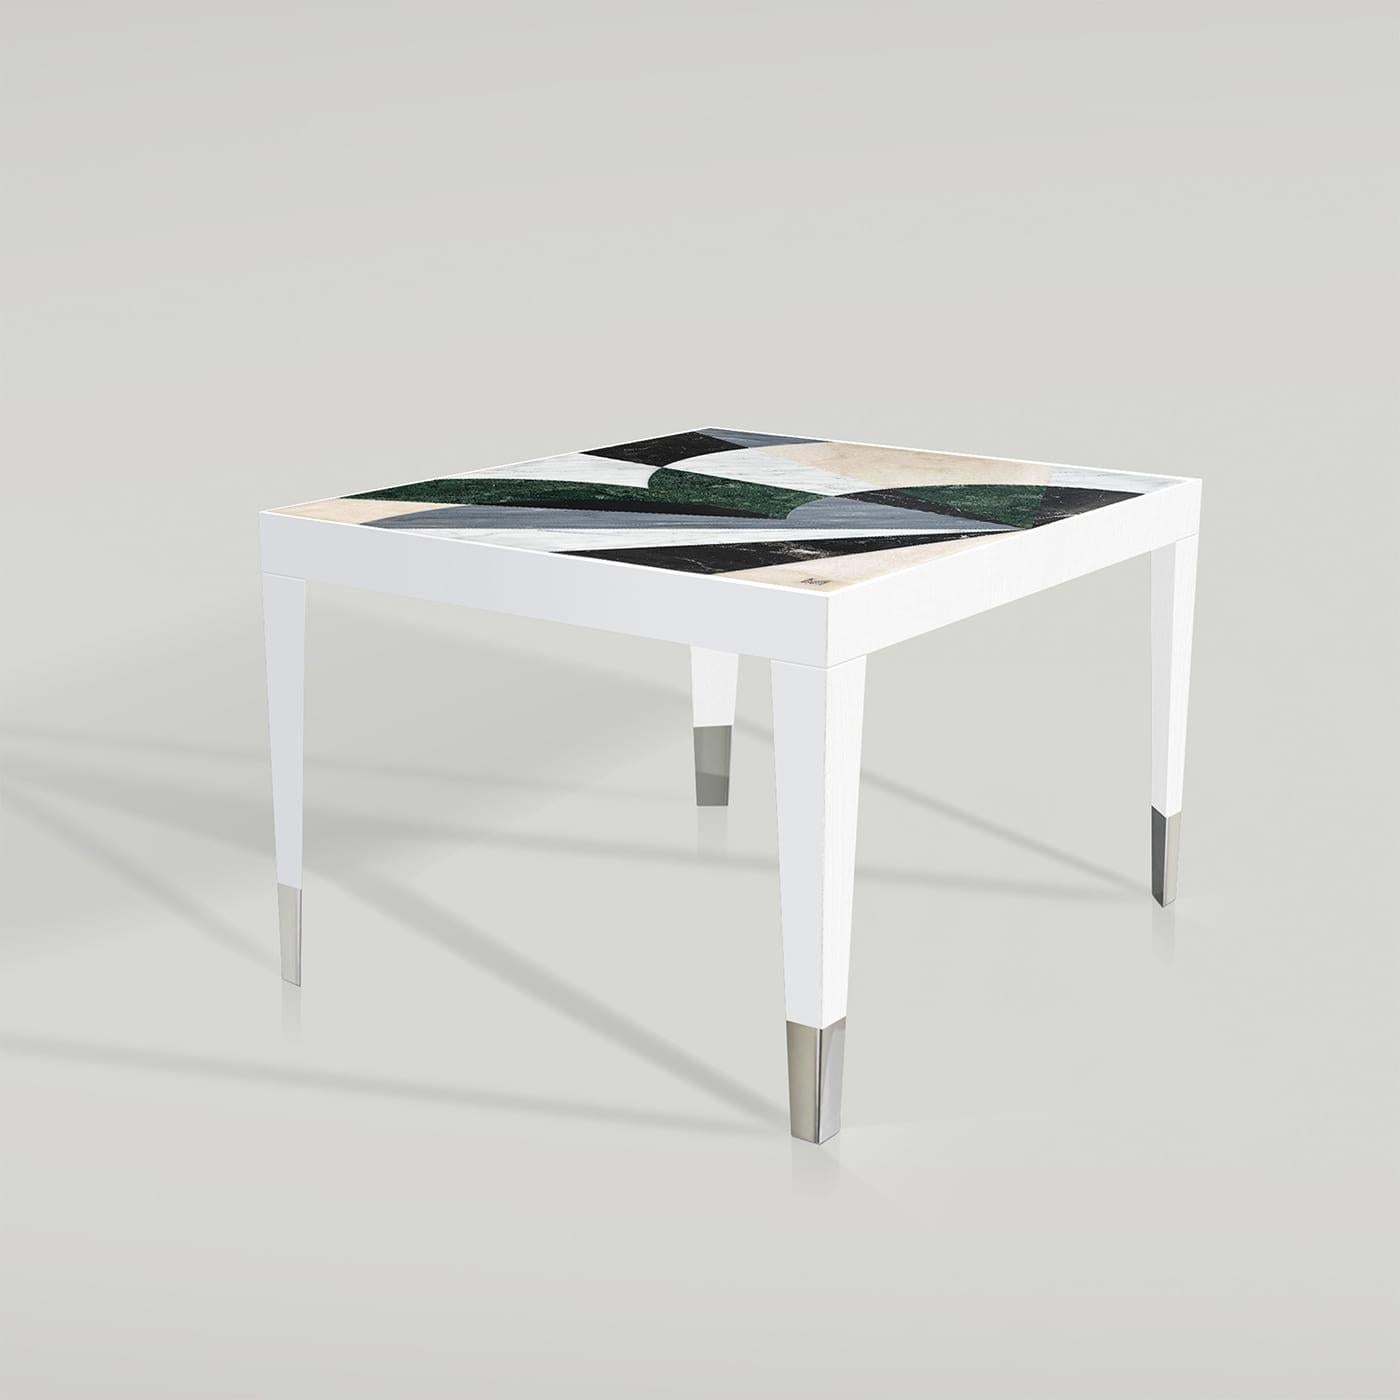 A gorgeous tribute to Turin and its characteristic clouds, this Nubi (Clouds) small coffee table features a stunning abstract geometric design created with marble inlays. Showcasing a glossy white finish wood table frame and polished steel feet, it